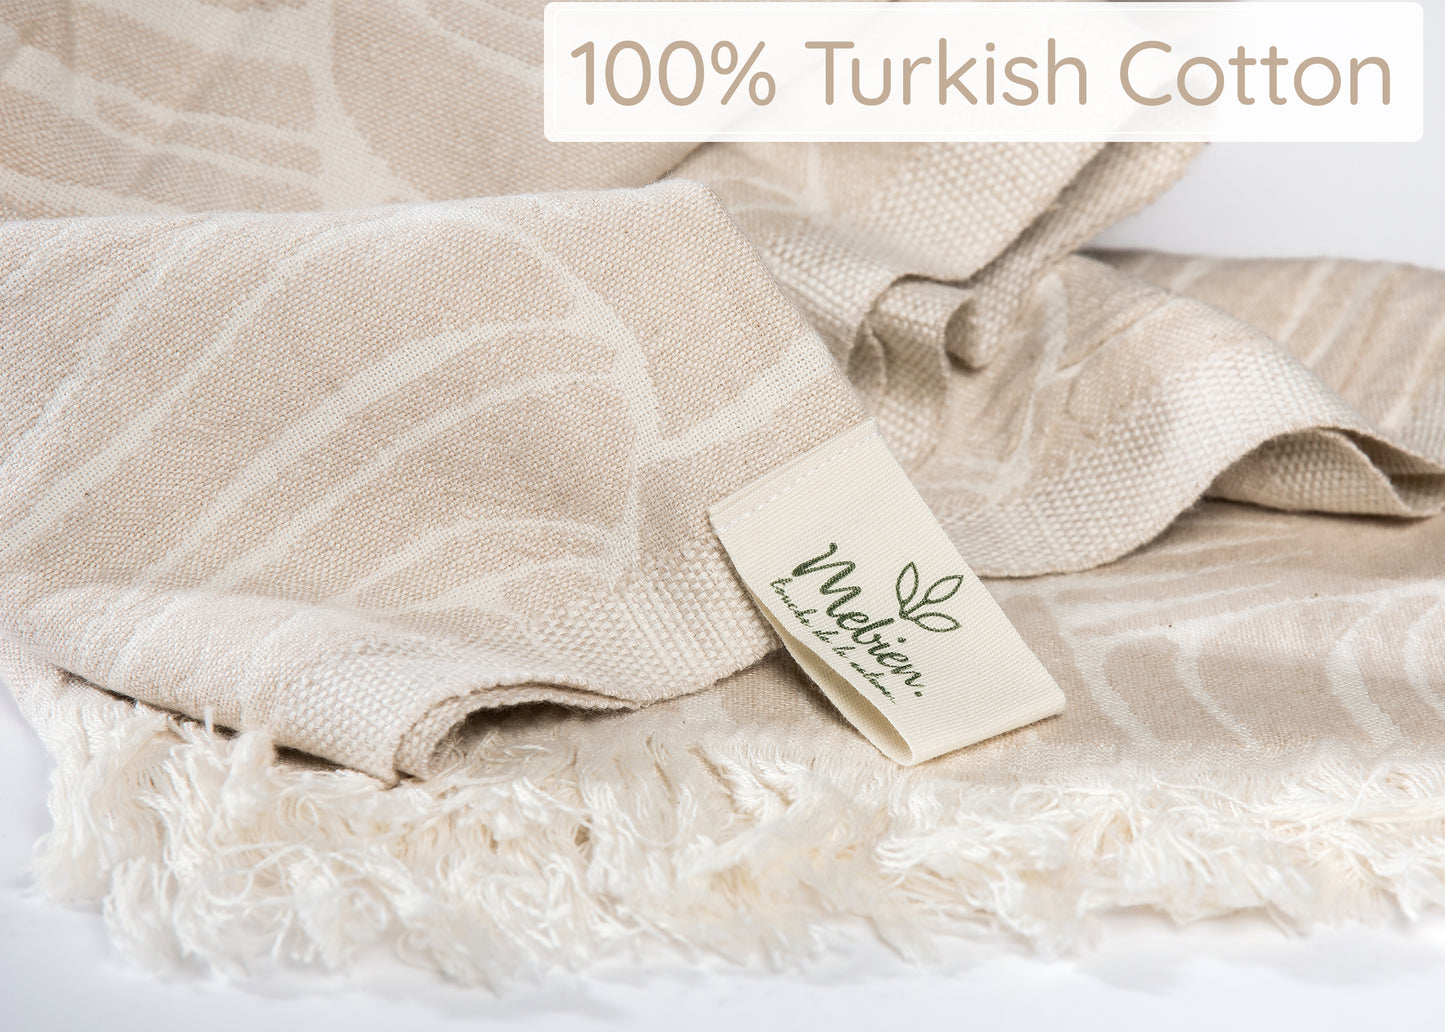 Beige Fish Turkish Beach Towel (35”x67”)  Lightweight, Quick drying and Sand Free Can be Used as Beach Blanket 100% Cotton